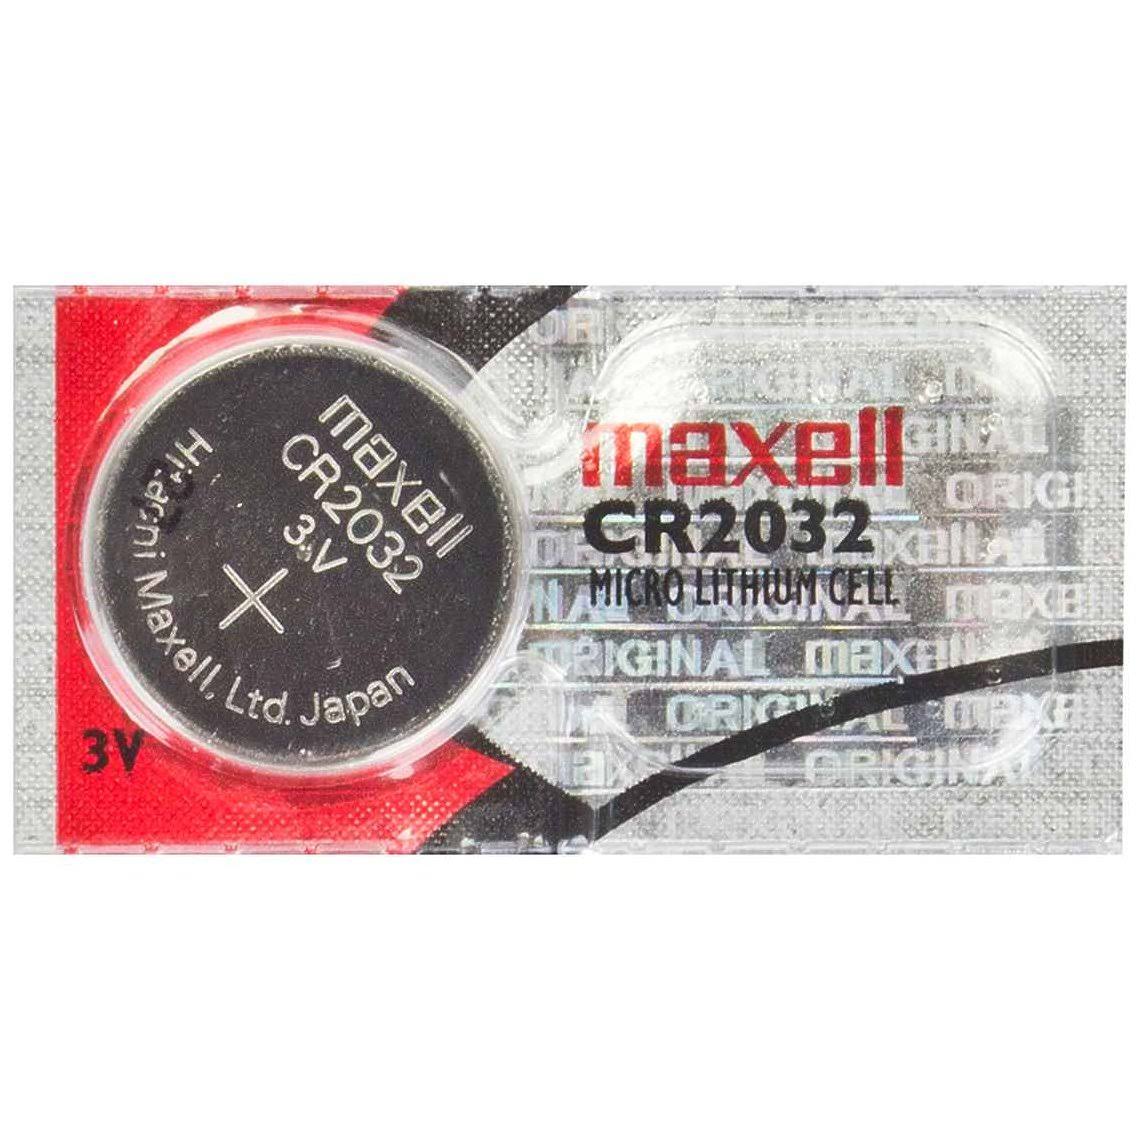 Maxell CR2032 Lithium Coin Cell Watch Battery, 220mAh